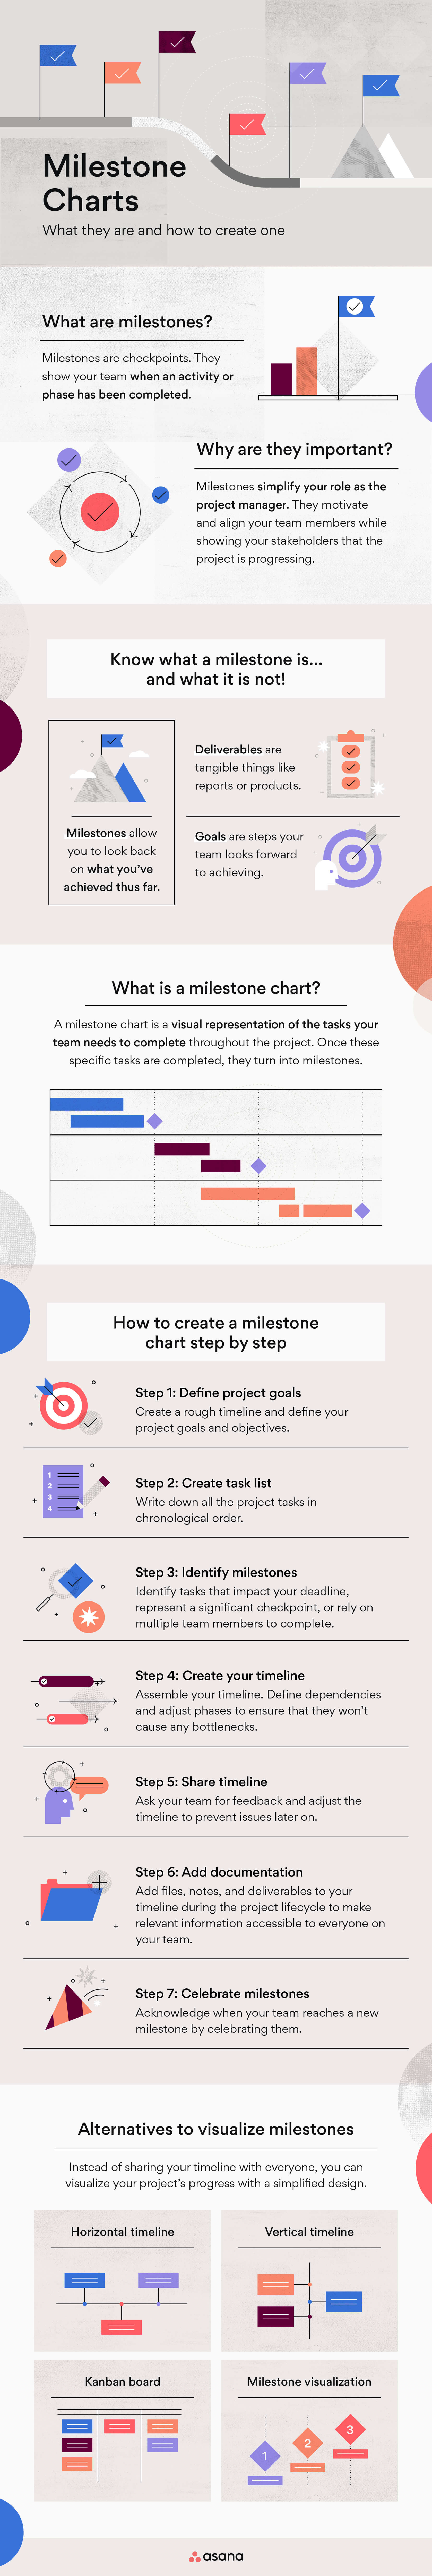 [inline illustration] what are milestone charts (infographic)